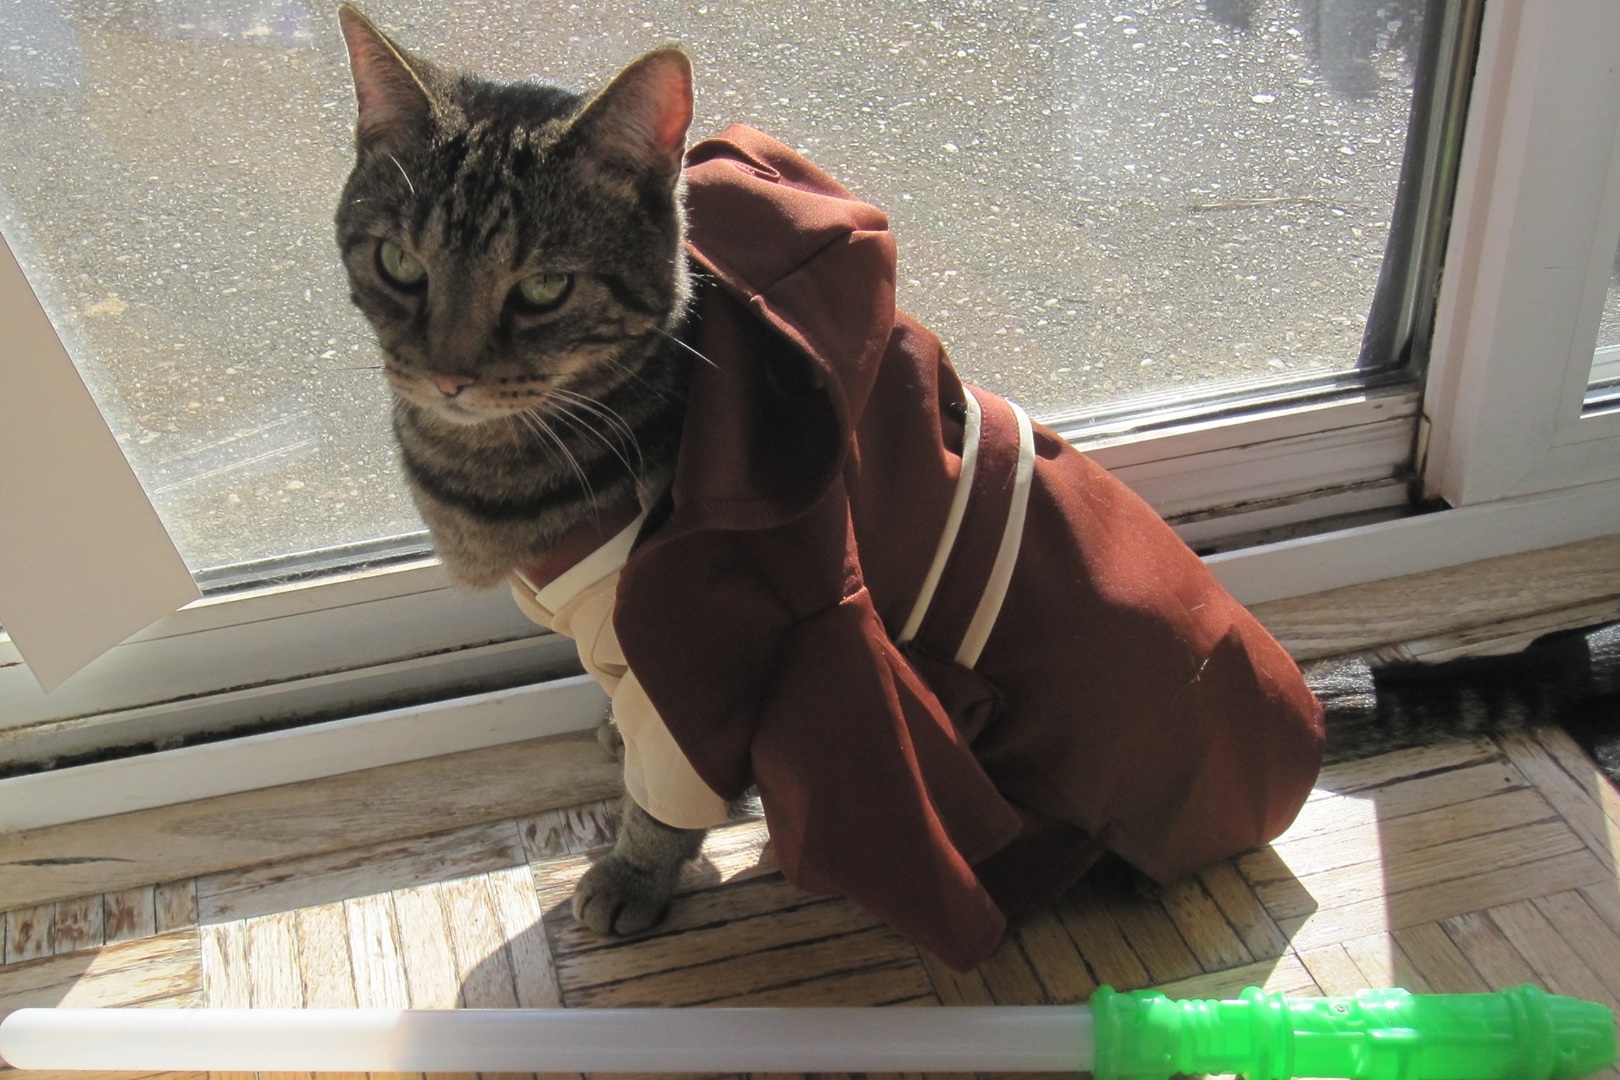  Watch out, the force is certainly with this feline. 